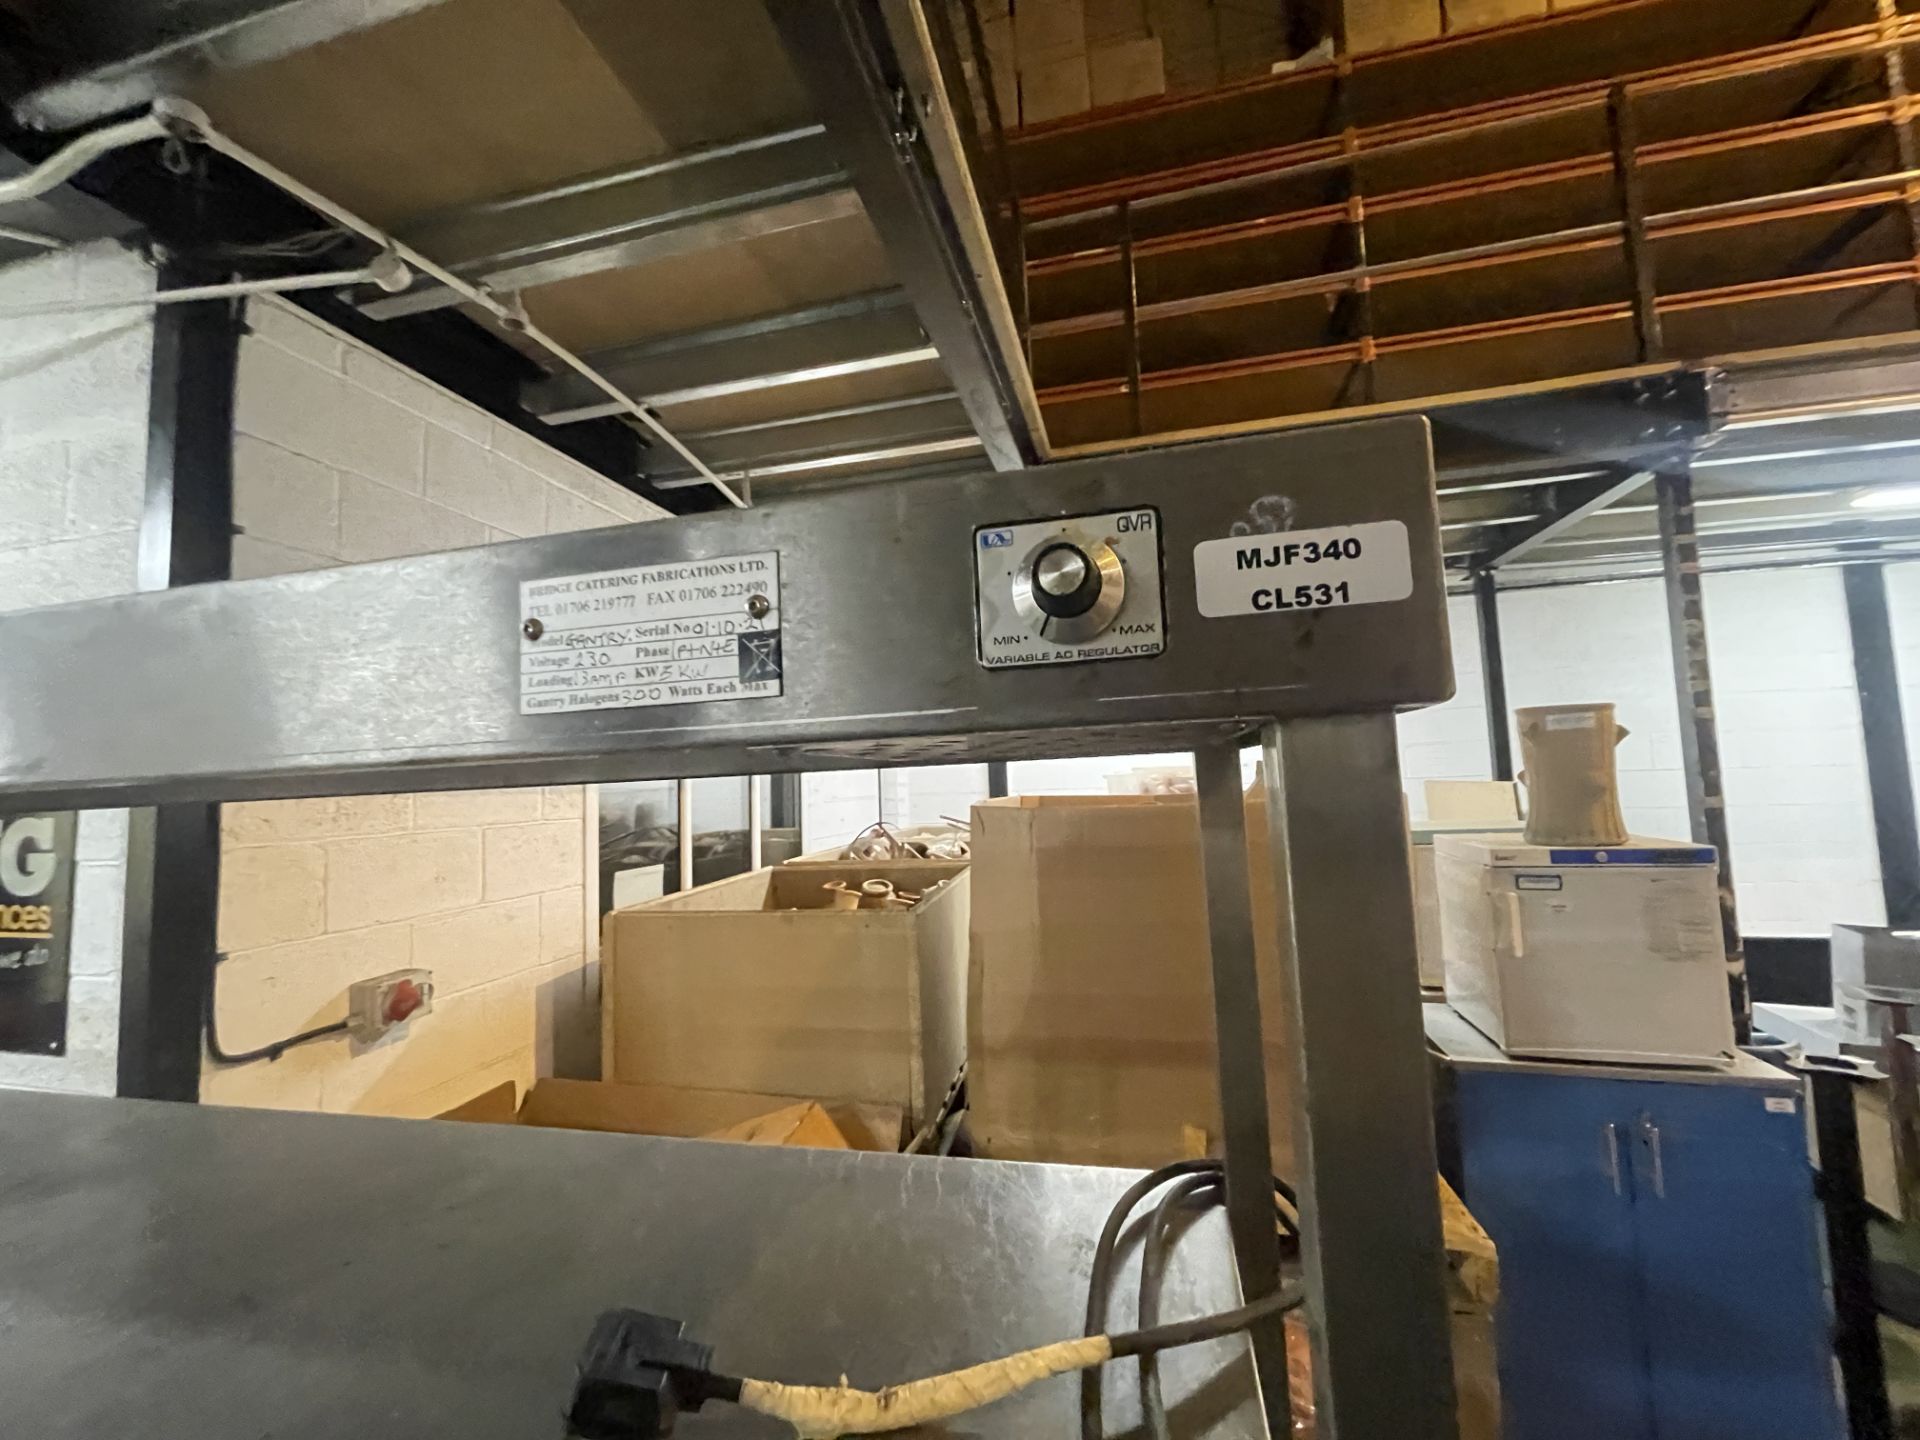 1 x Stainless Steel Heated Passthrough Gantry With Two Heated Shelves - Dimensions: H110 x W182 - Image 6 of 6